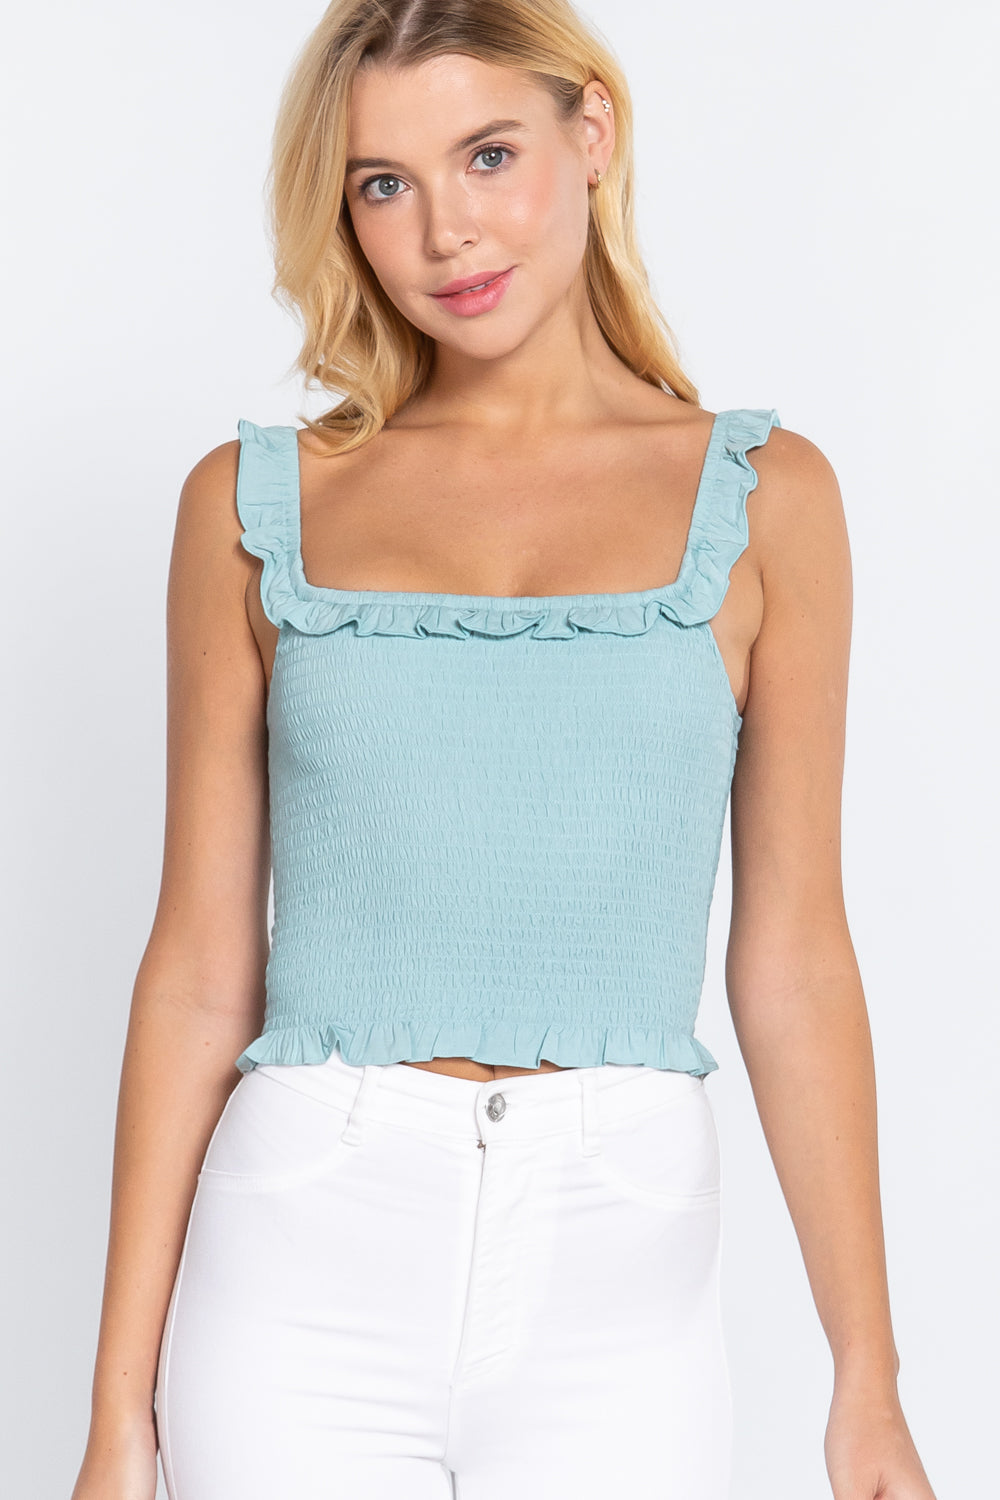 The802Gypsy  shirts and tops S / mint ❤GYPSY LOVE-Ruffle Cami Woven Top